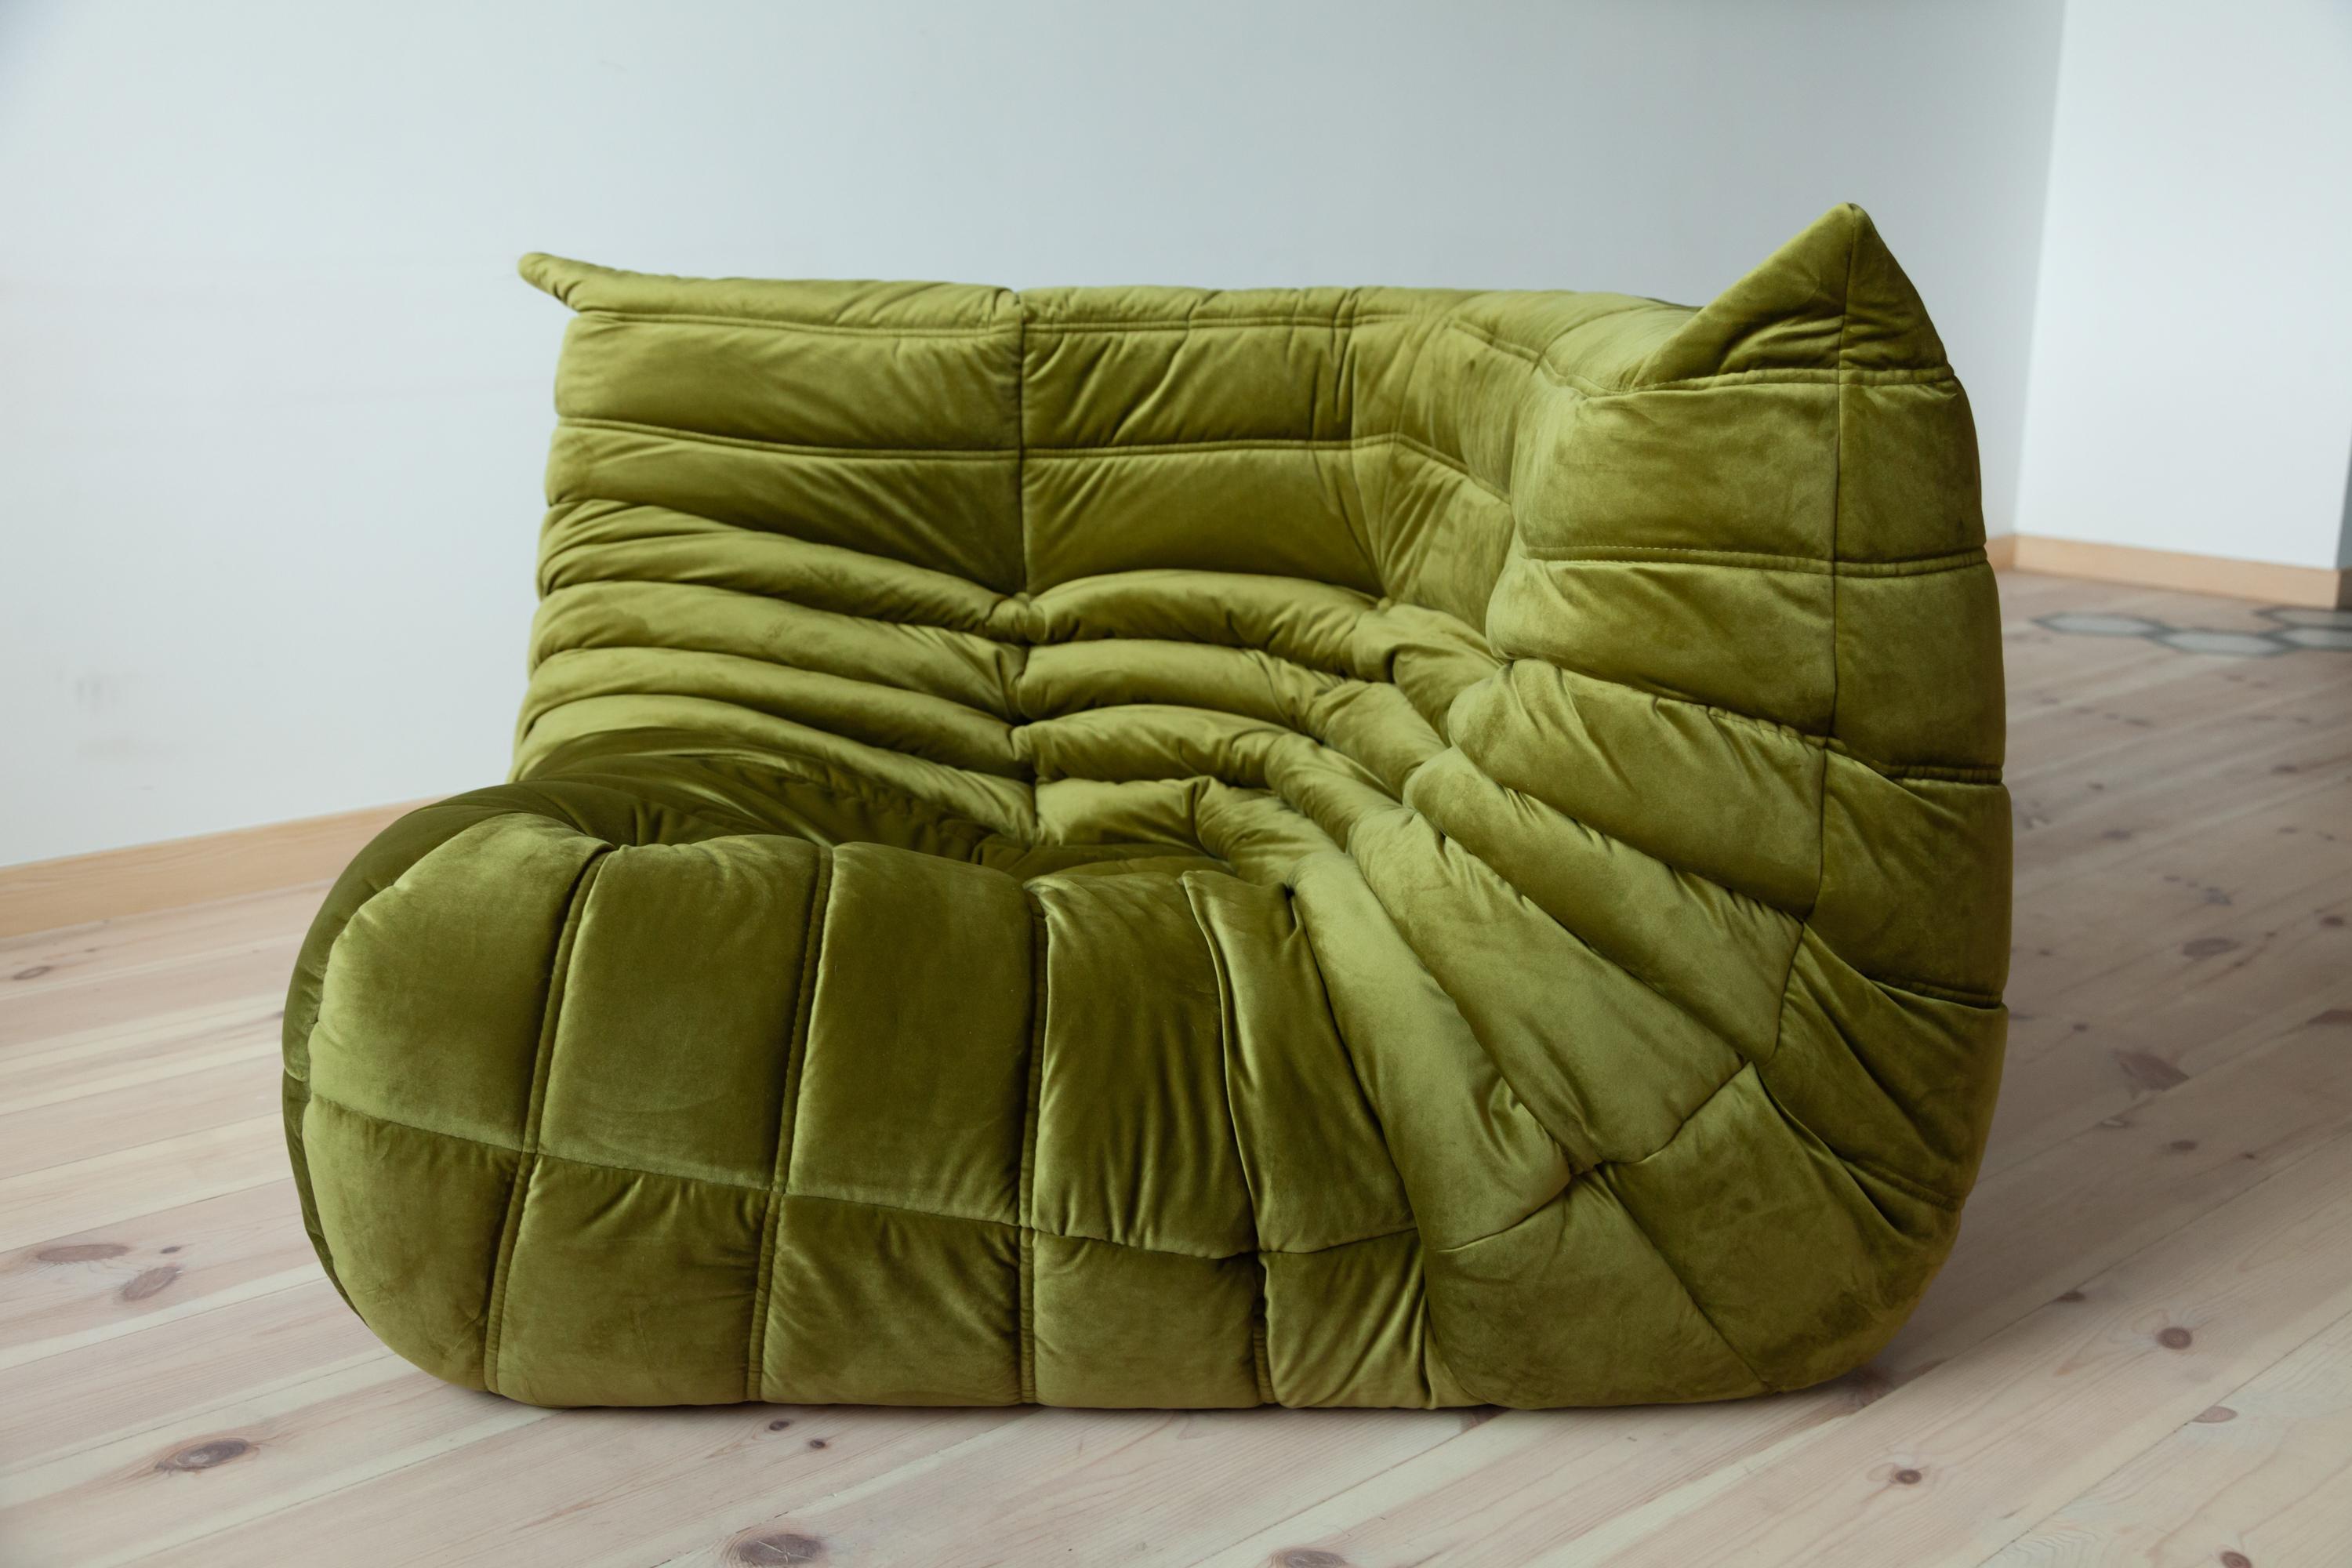 This vintage Togo corner couch was designed by Michel Ducaroy in 1973 and was manufactured by Ligne Roset in France. It has been reupholstered in new olive green velvet (102 x 102 x 70 cm). It has the original Ligne Roset logo and genuine Ligne